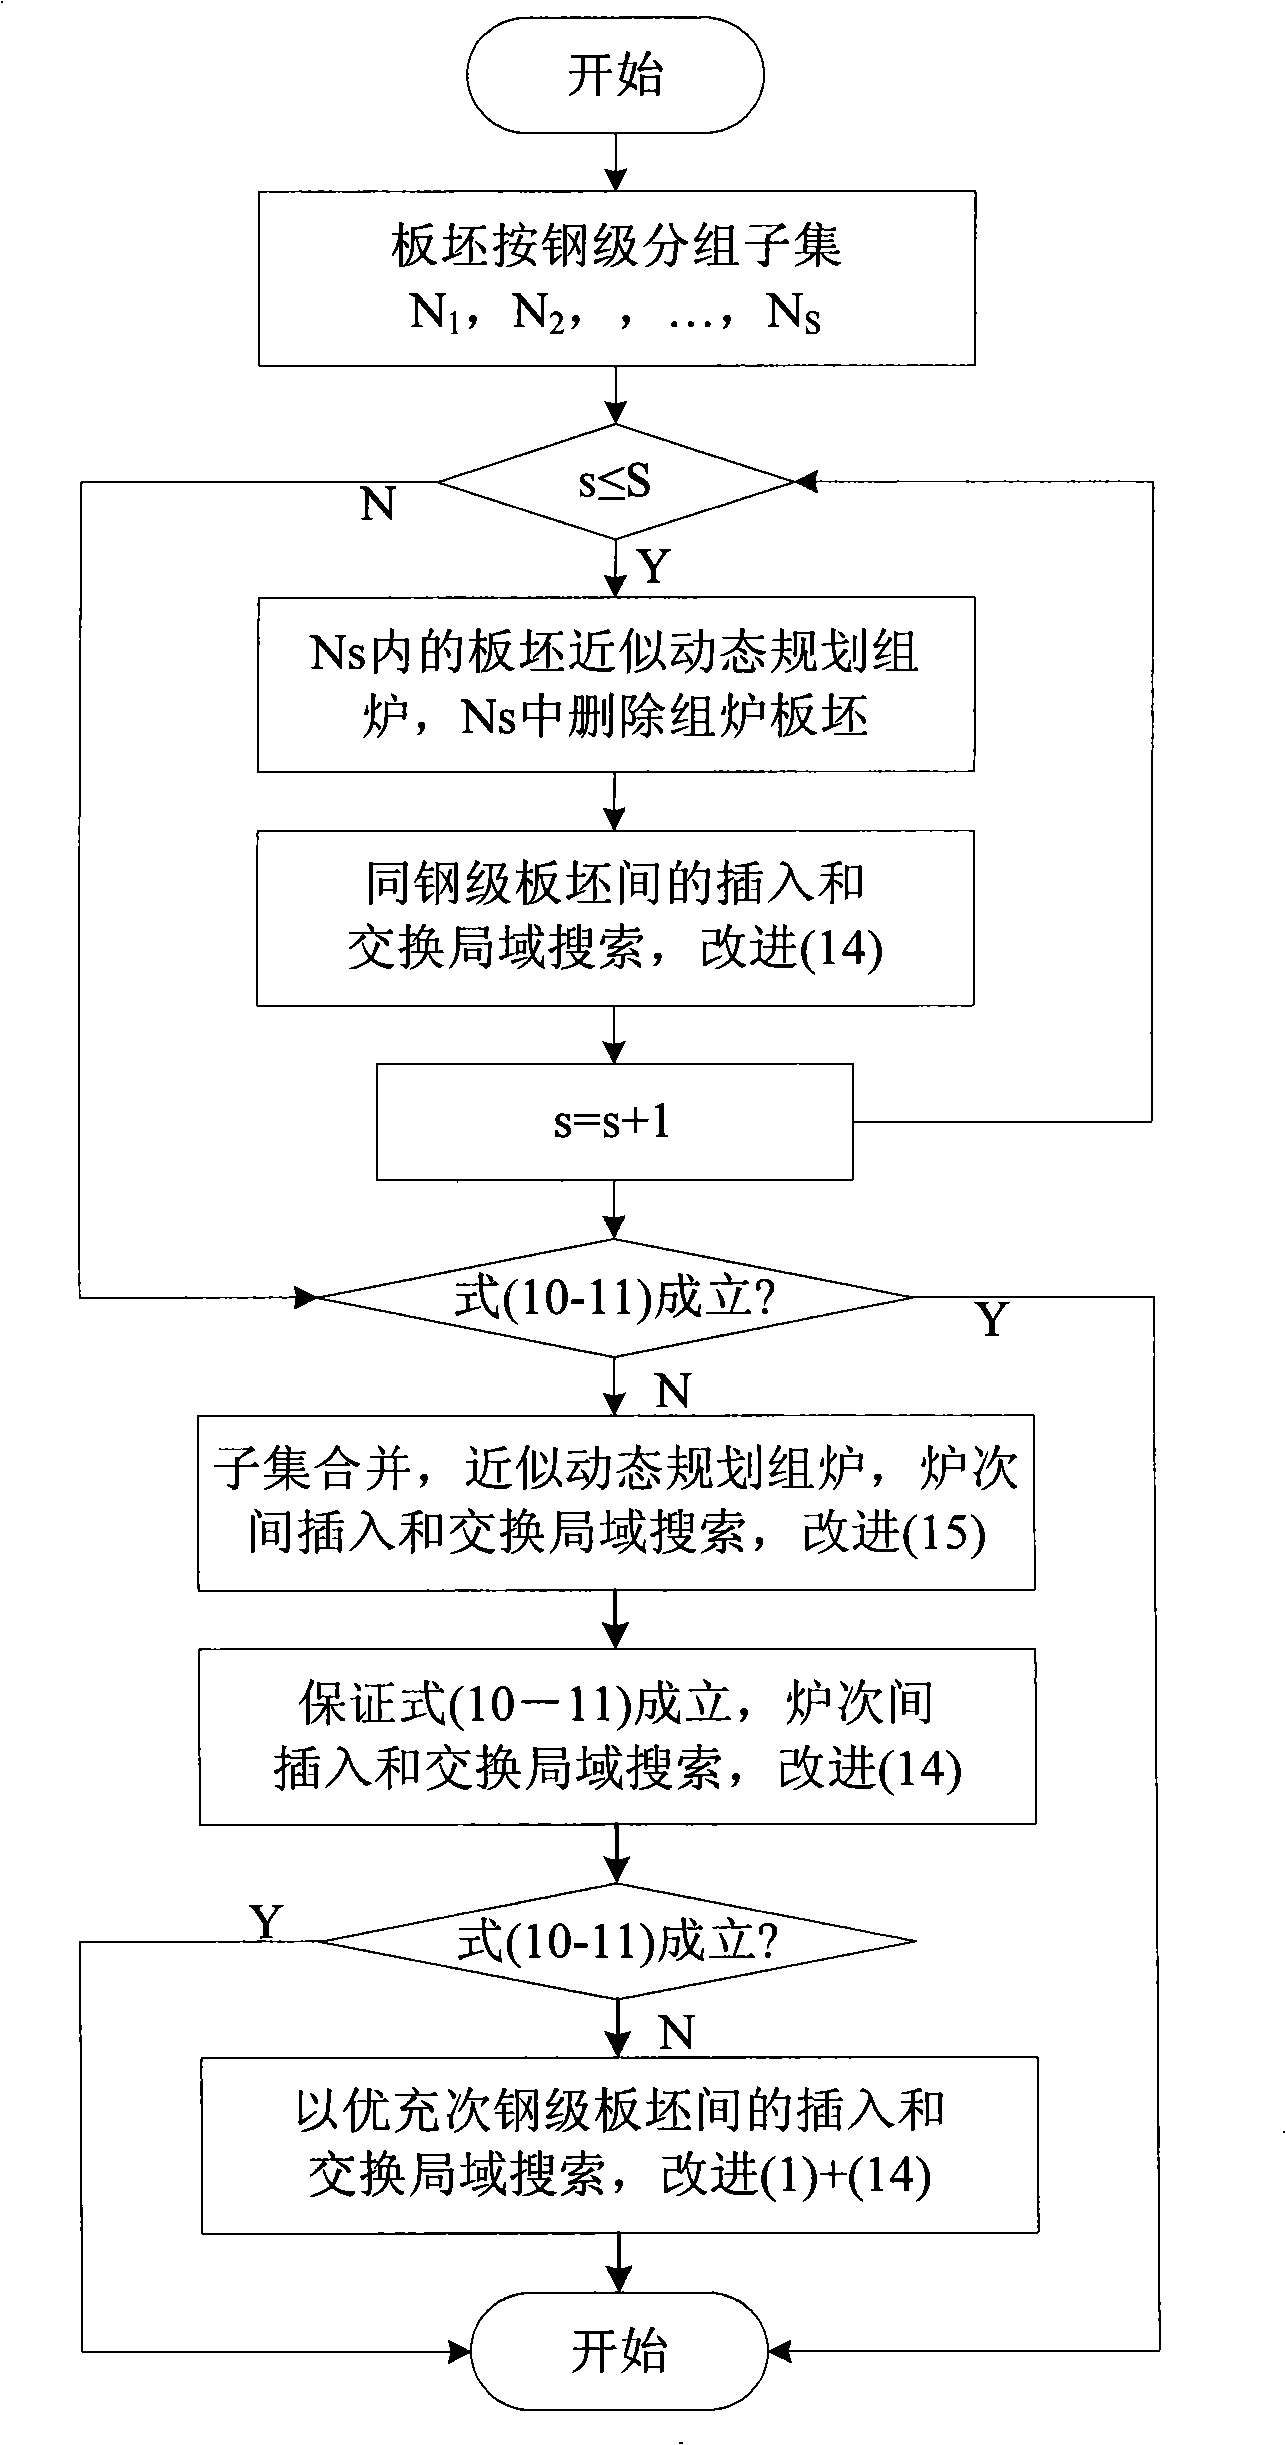 Method and system for automatically making steel-smelting continuous casting furnace sub batch plan